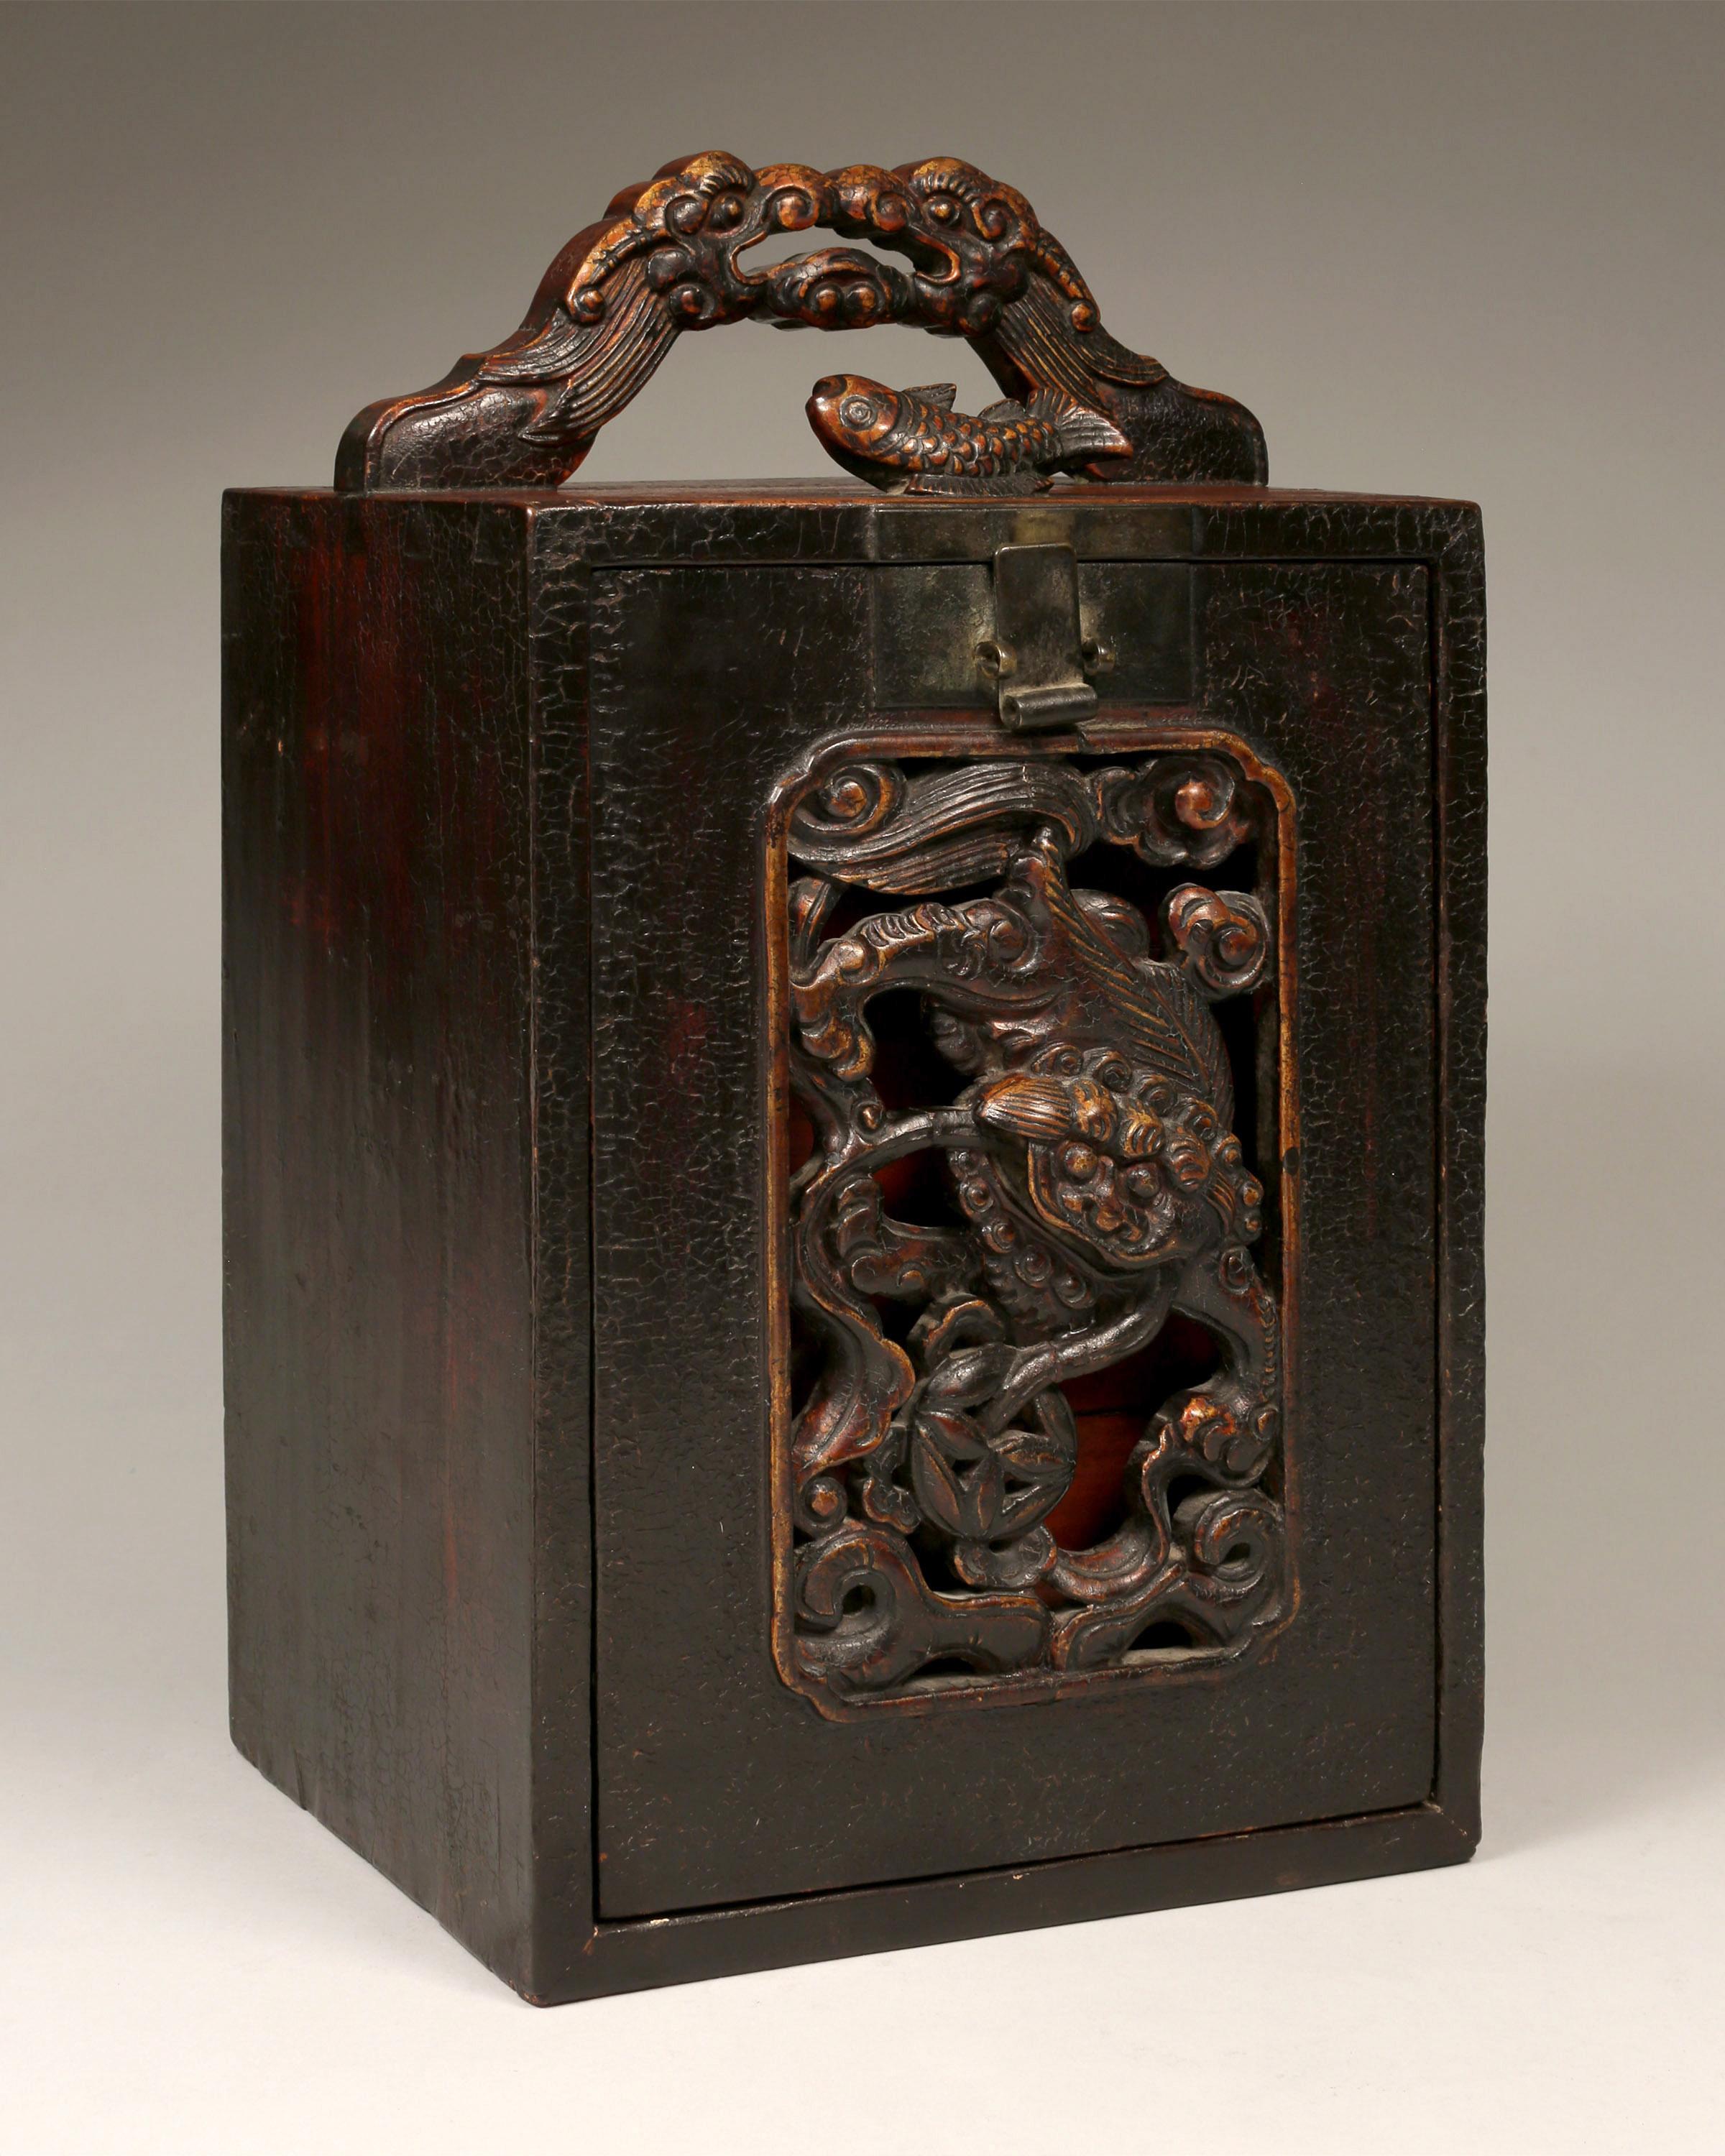 Chinese Qing Dynasty '18th / 19th Century' High Official's Box for his Seals, China For Sale